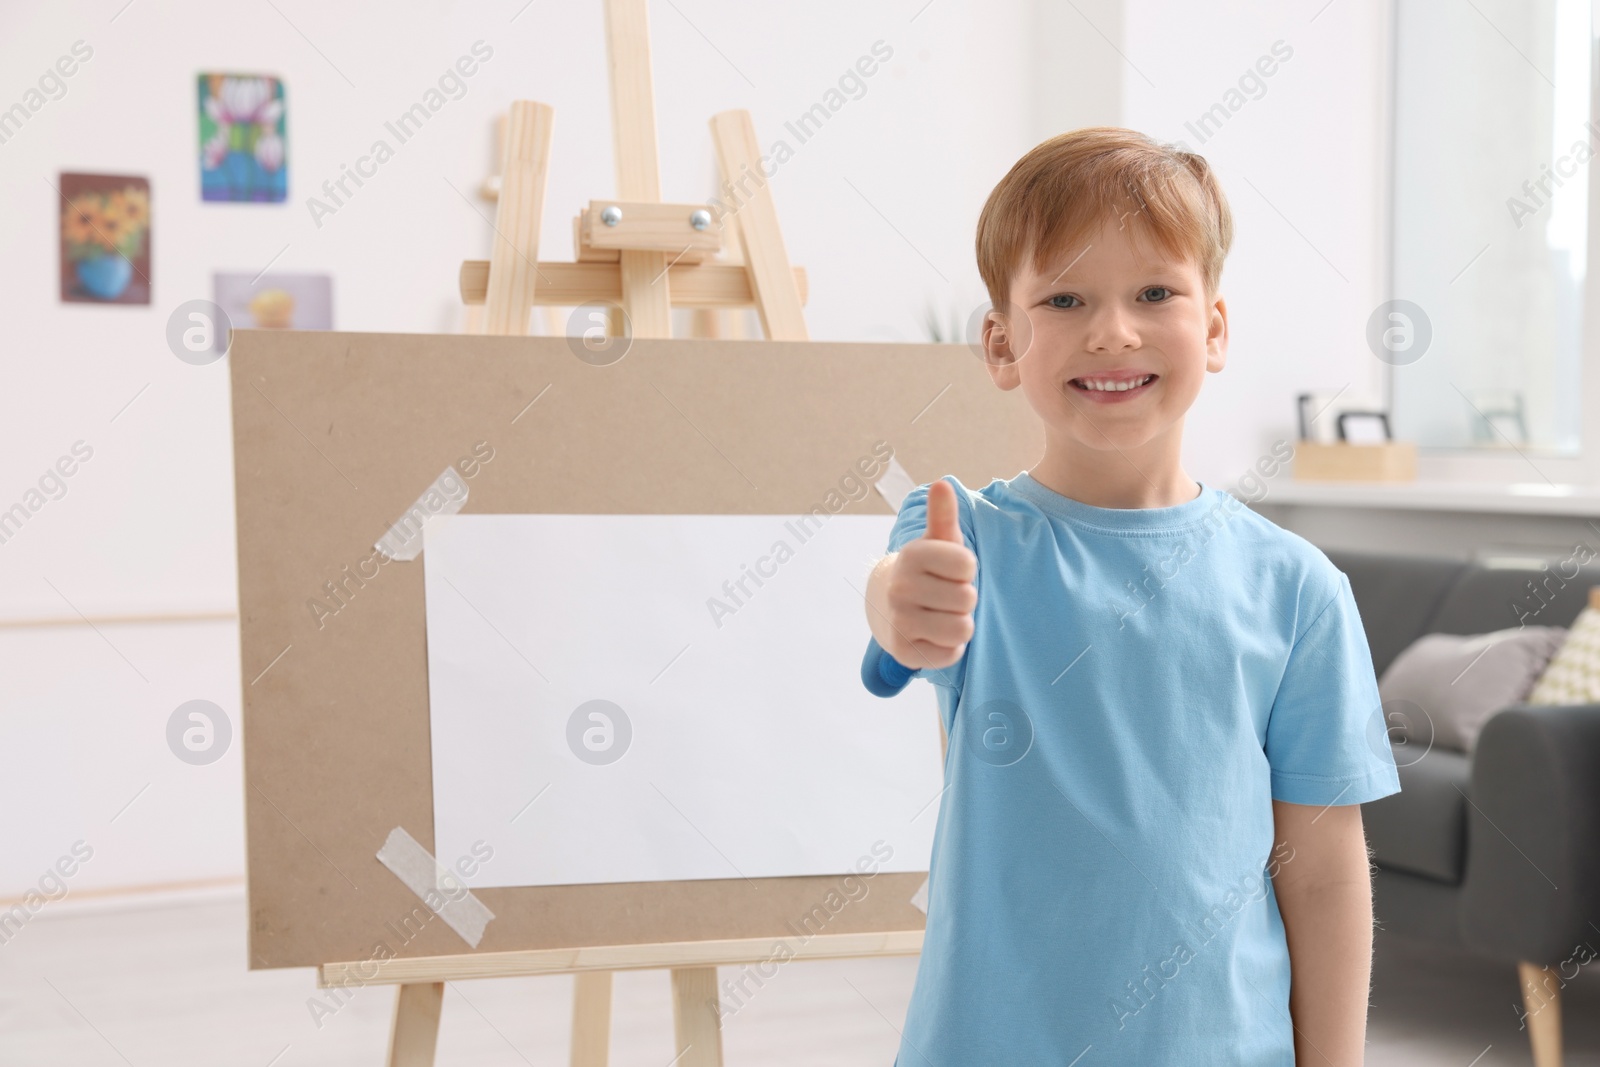 Photo of Happy little boy showing thumbs up in studio. Using easel to hold canvas